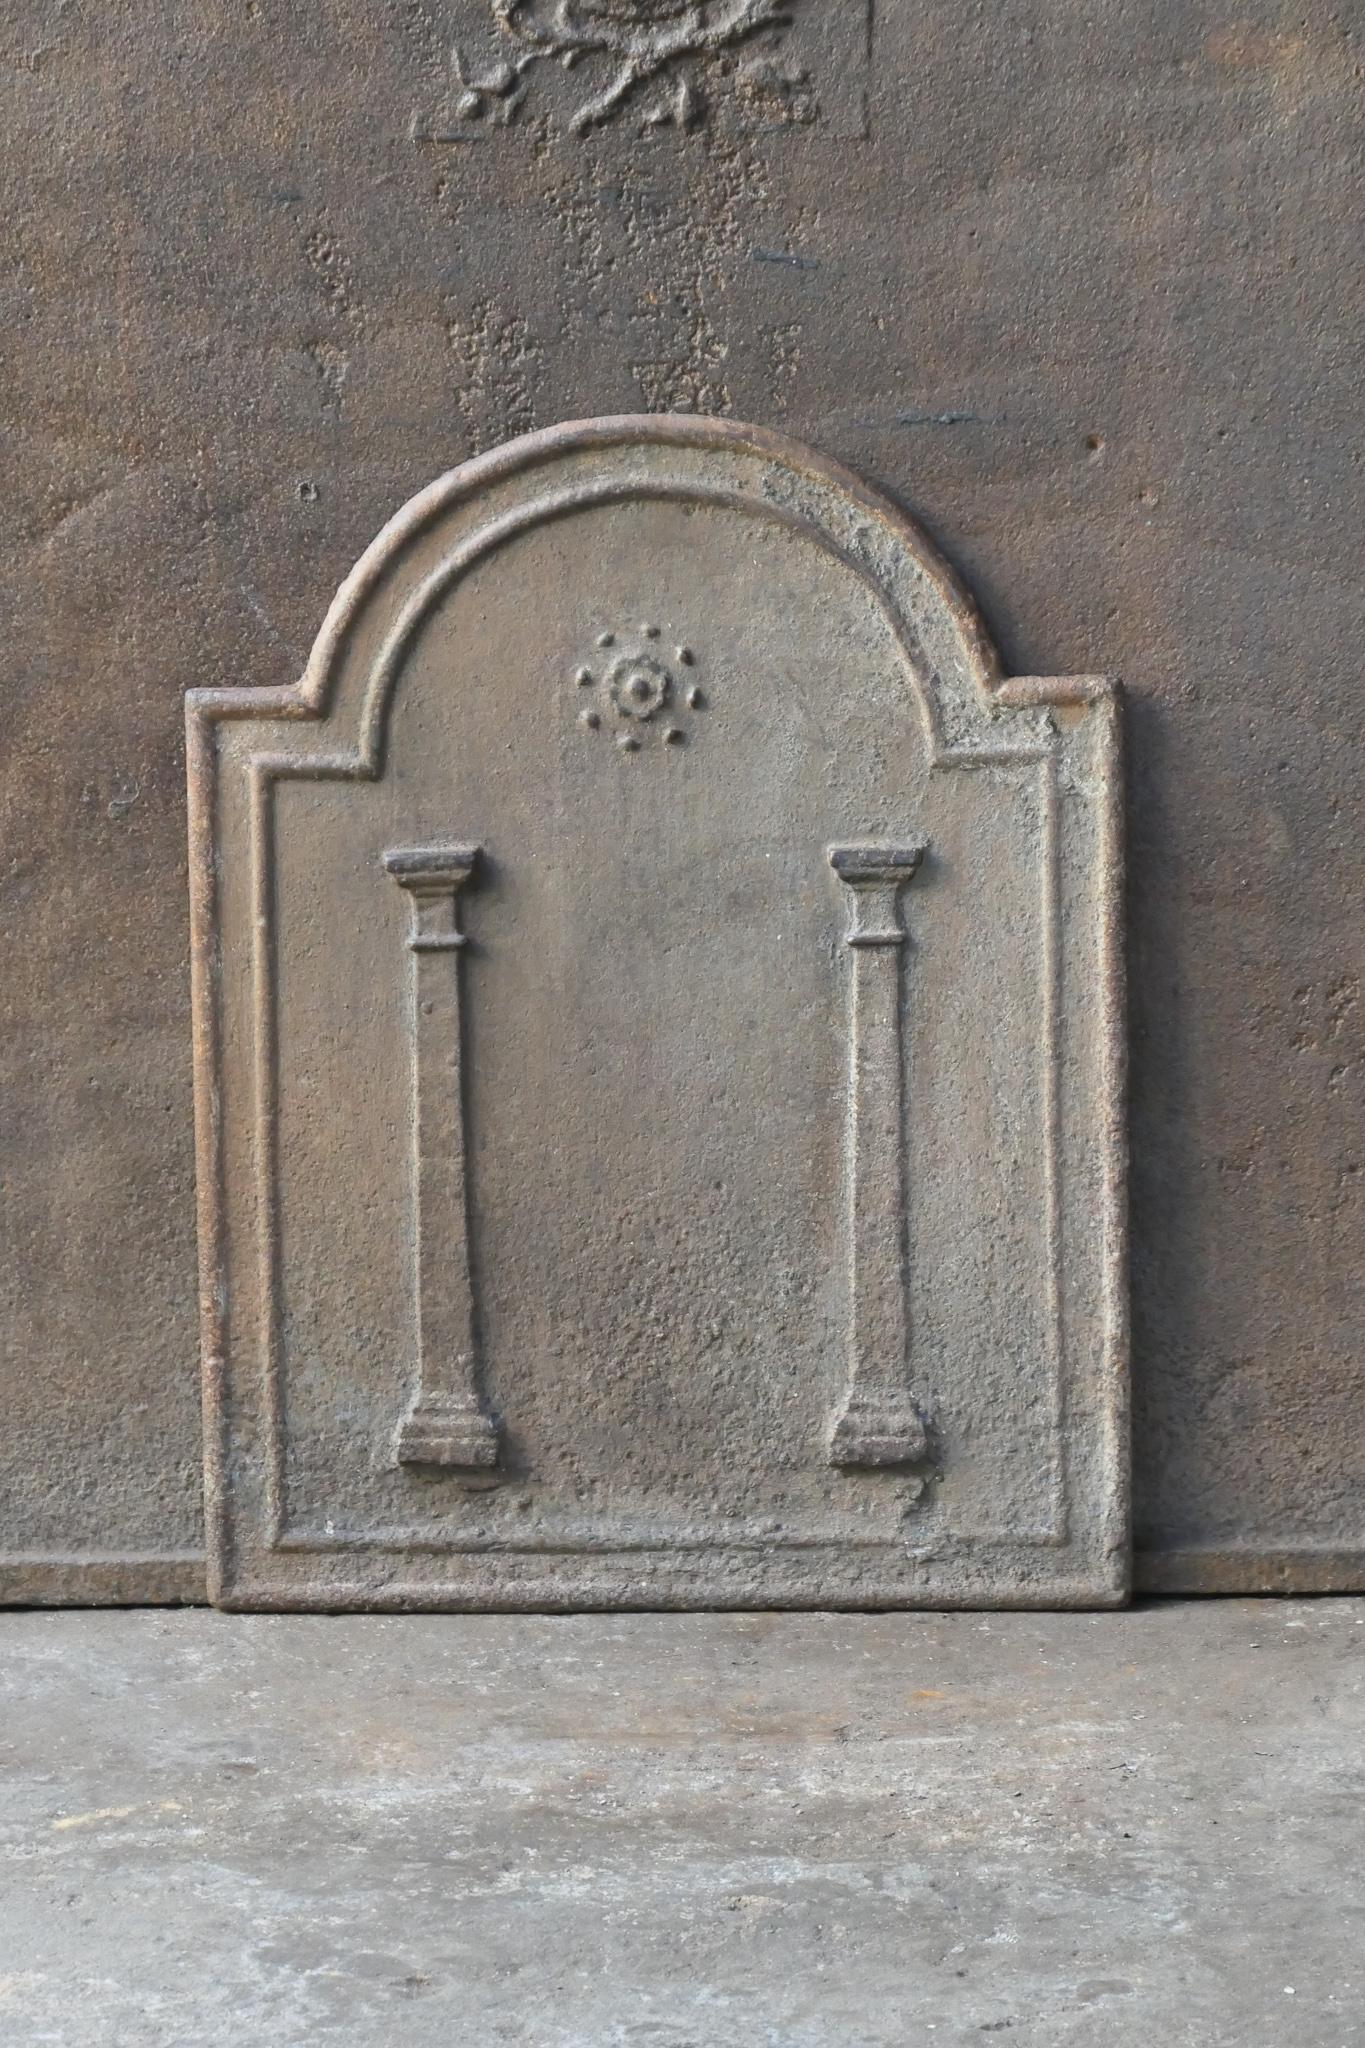 19th century French neoclassical fireback with two pillars of freedom. The pillars symbolize the value liberty, one of the three values of the French revolution. 

The fireback is made of cast iron and has a natural brown patina. Upon request it